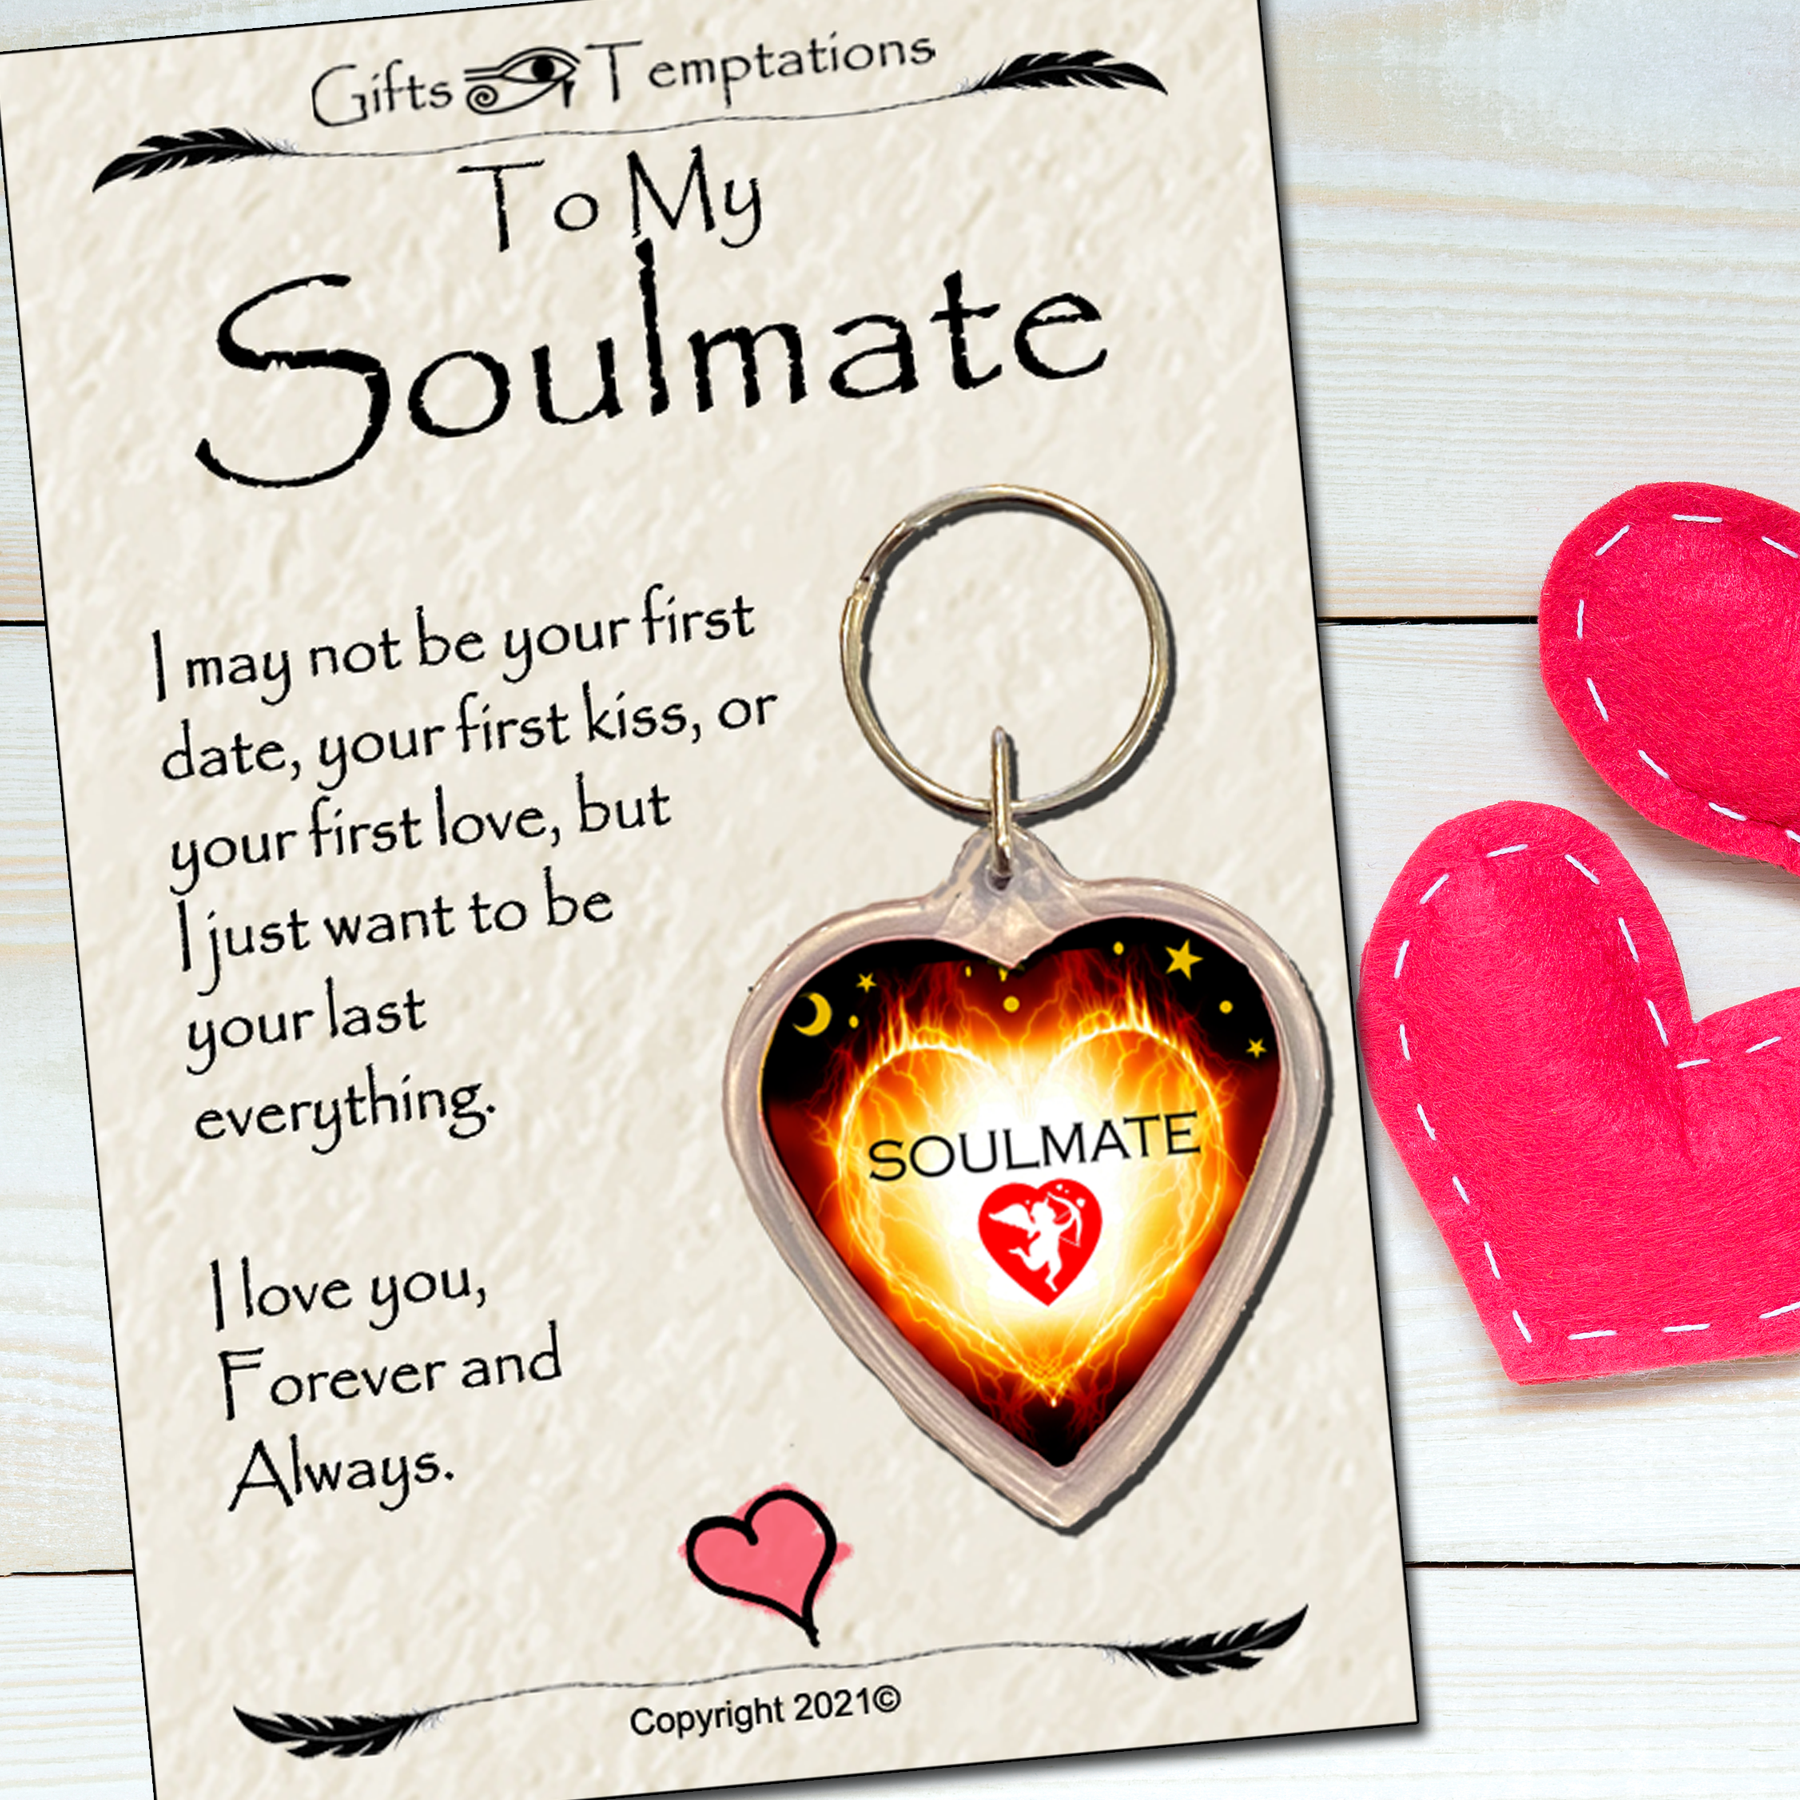 Soulmate Your Last Everything Keyring Gift for Her or Him